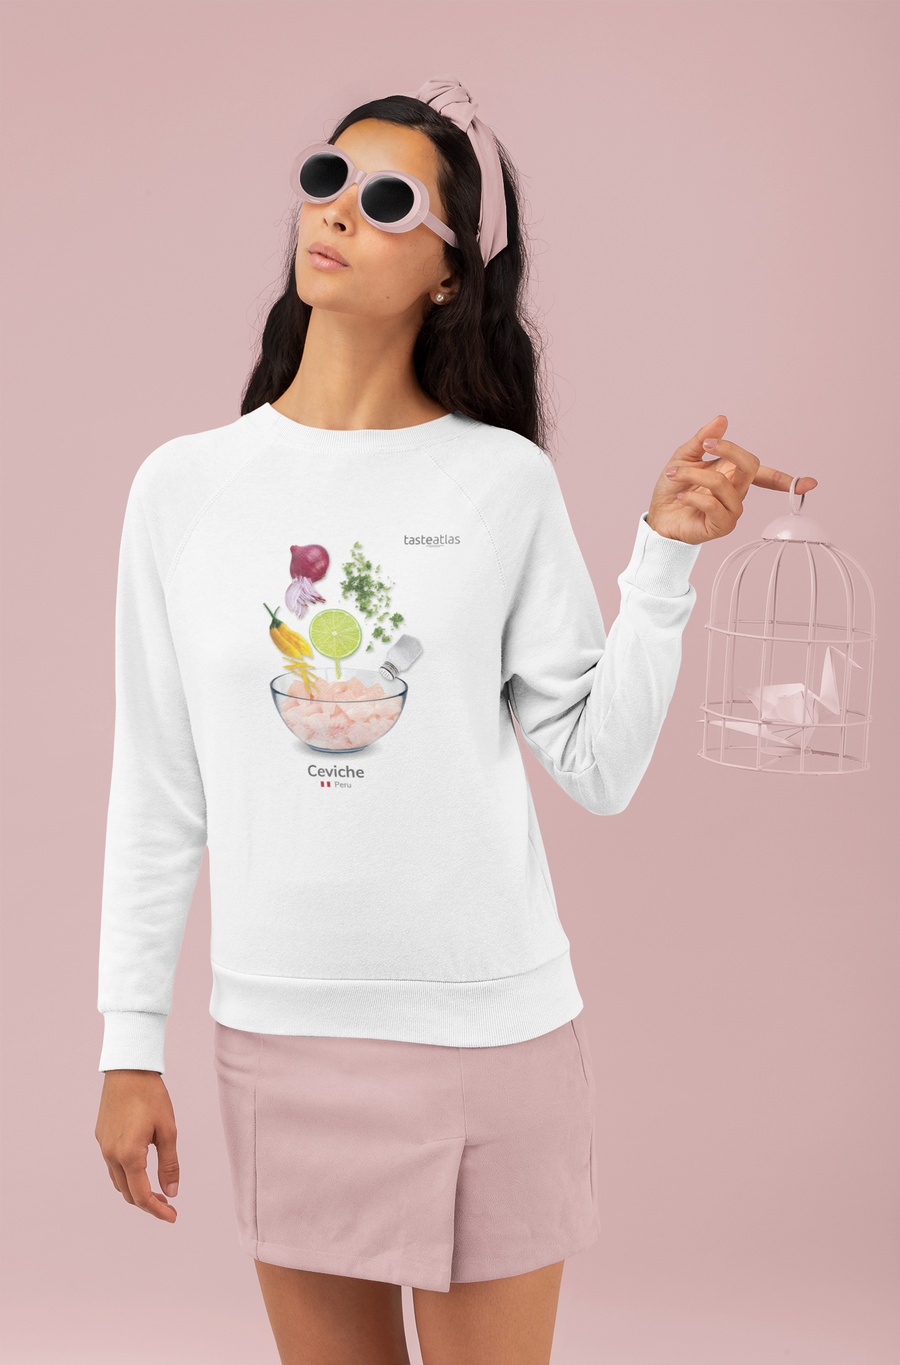 woman wearing ceviche sweatshirt in front of a pink wall